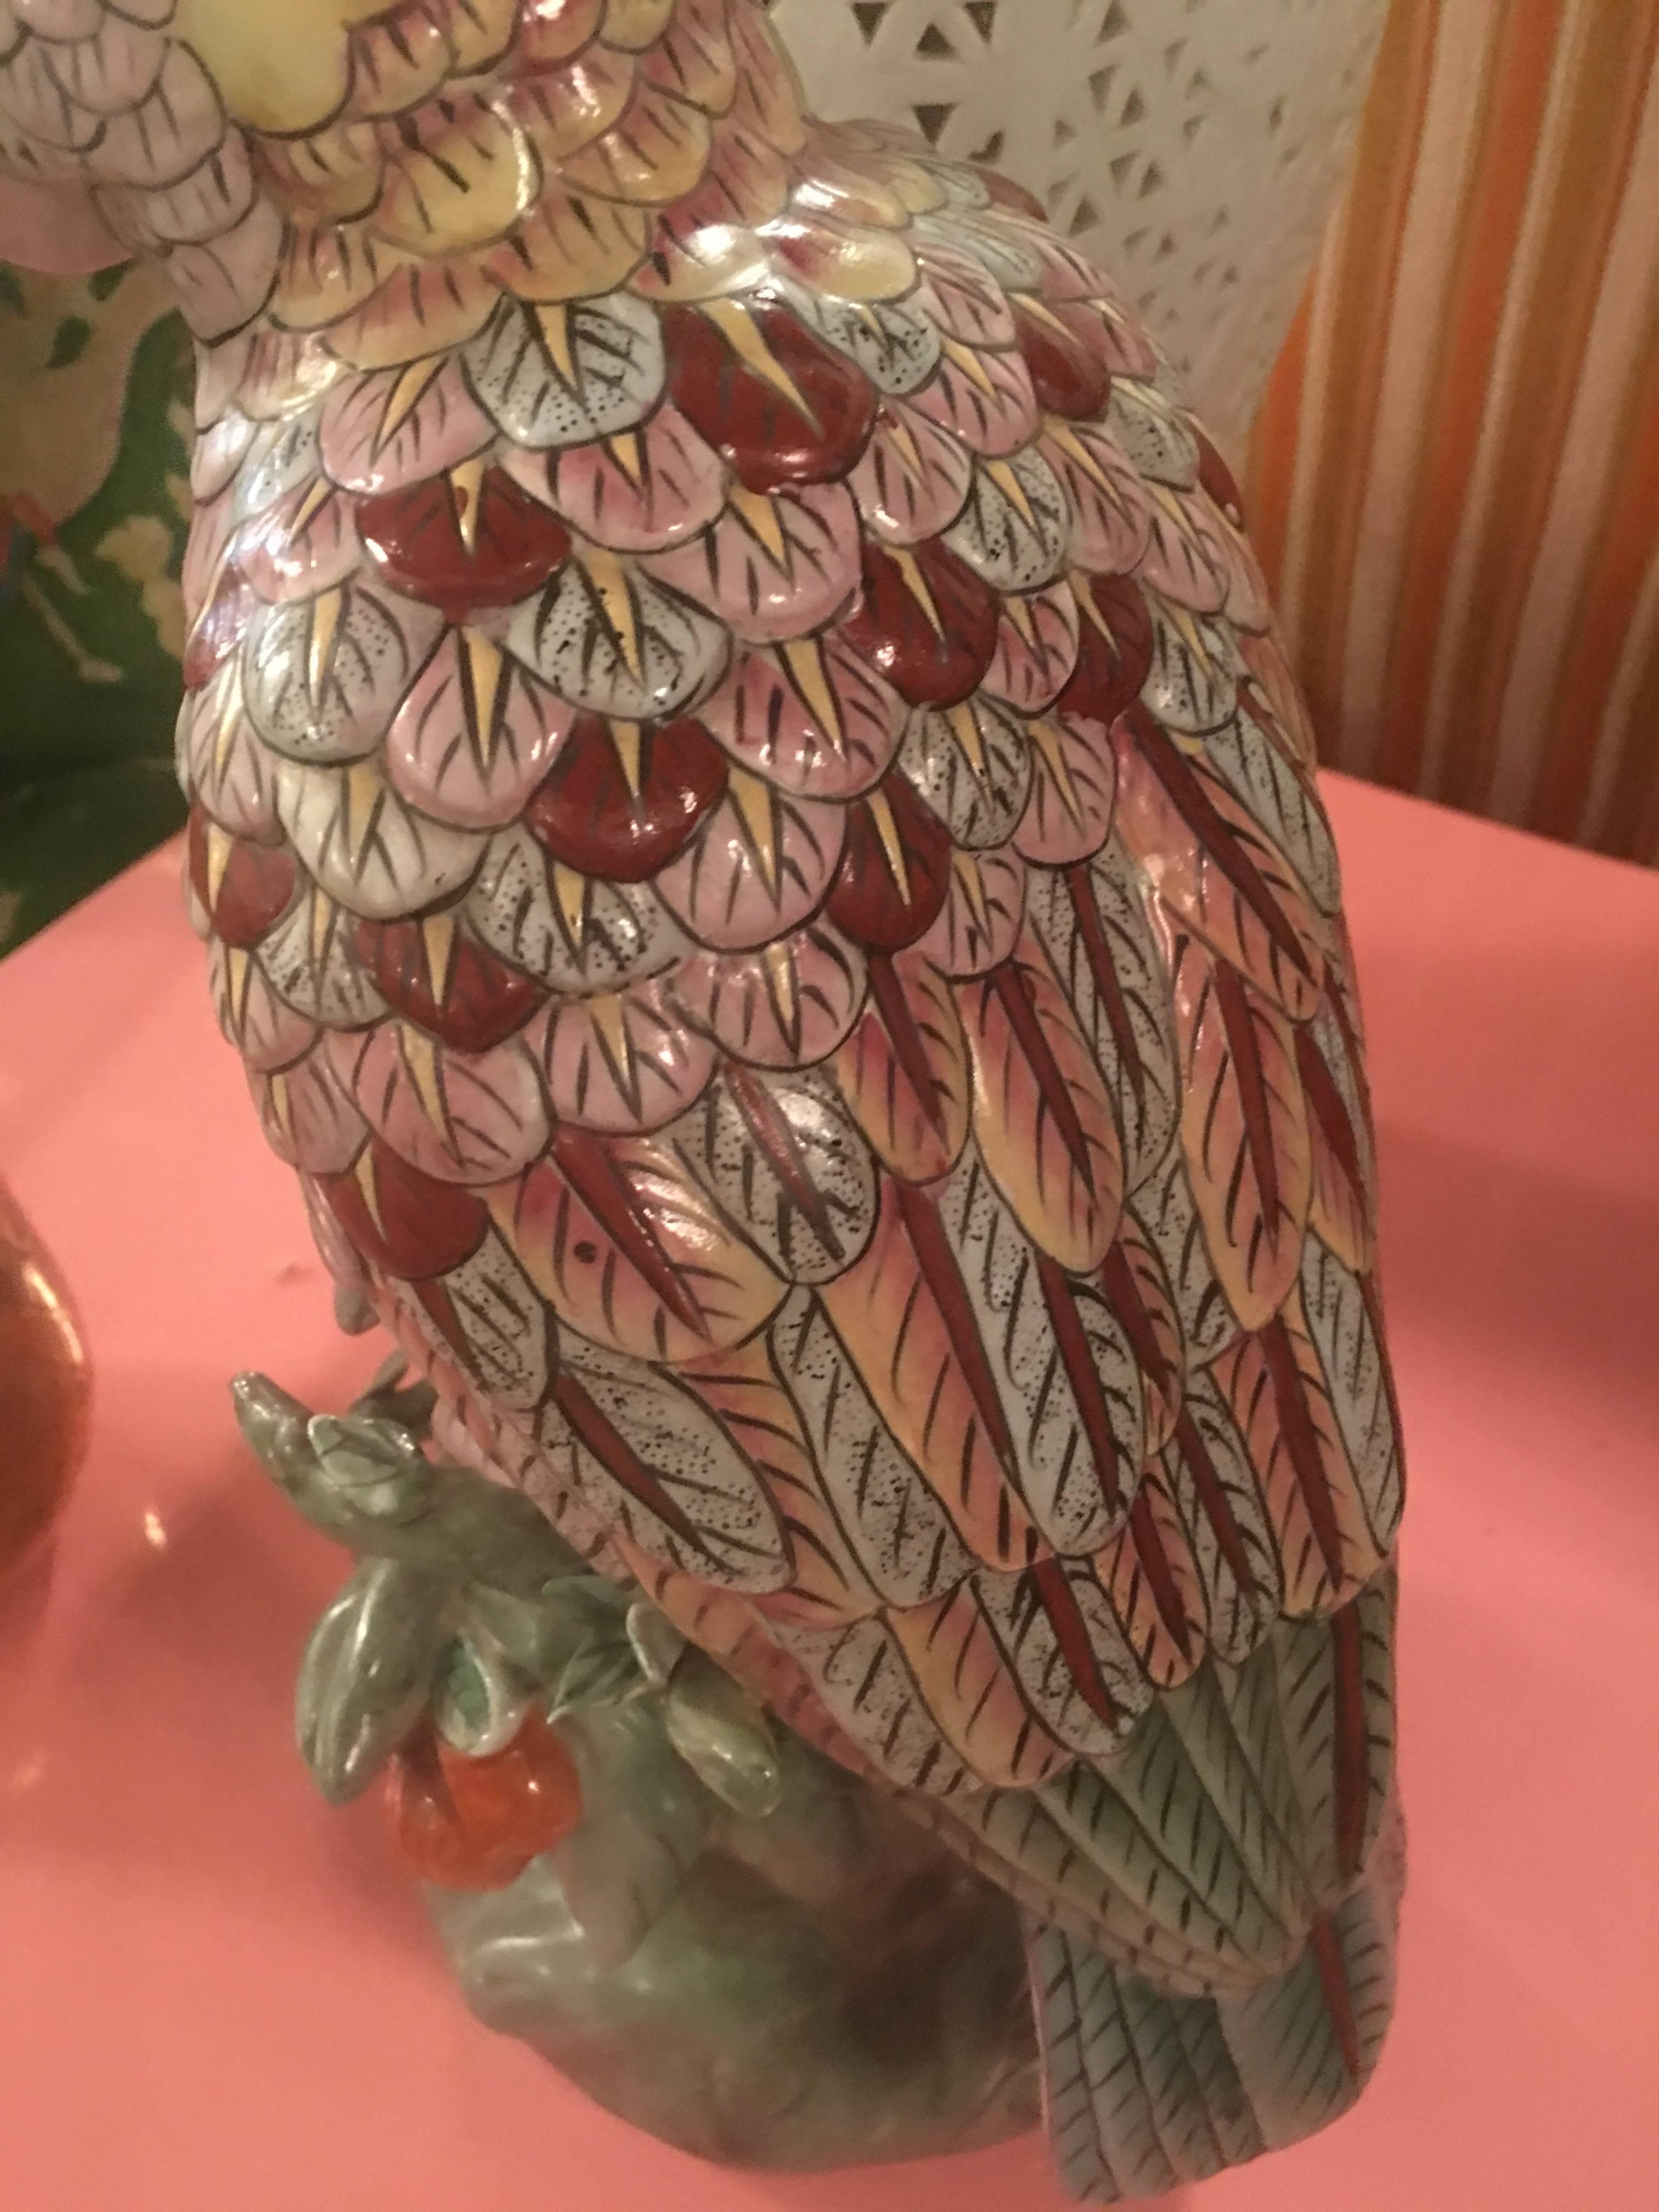 Lovely vintage large tropical parrot porcelain statue with pink and purple colors. No chips or breaks.